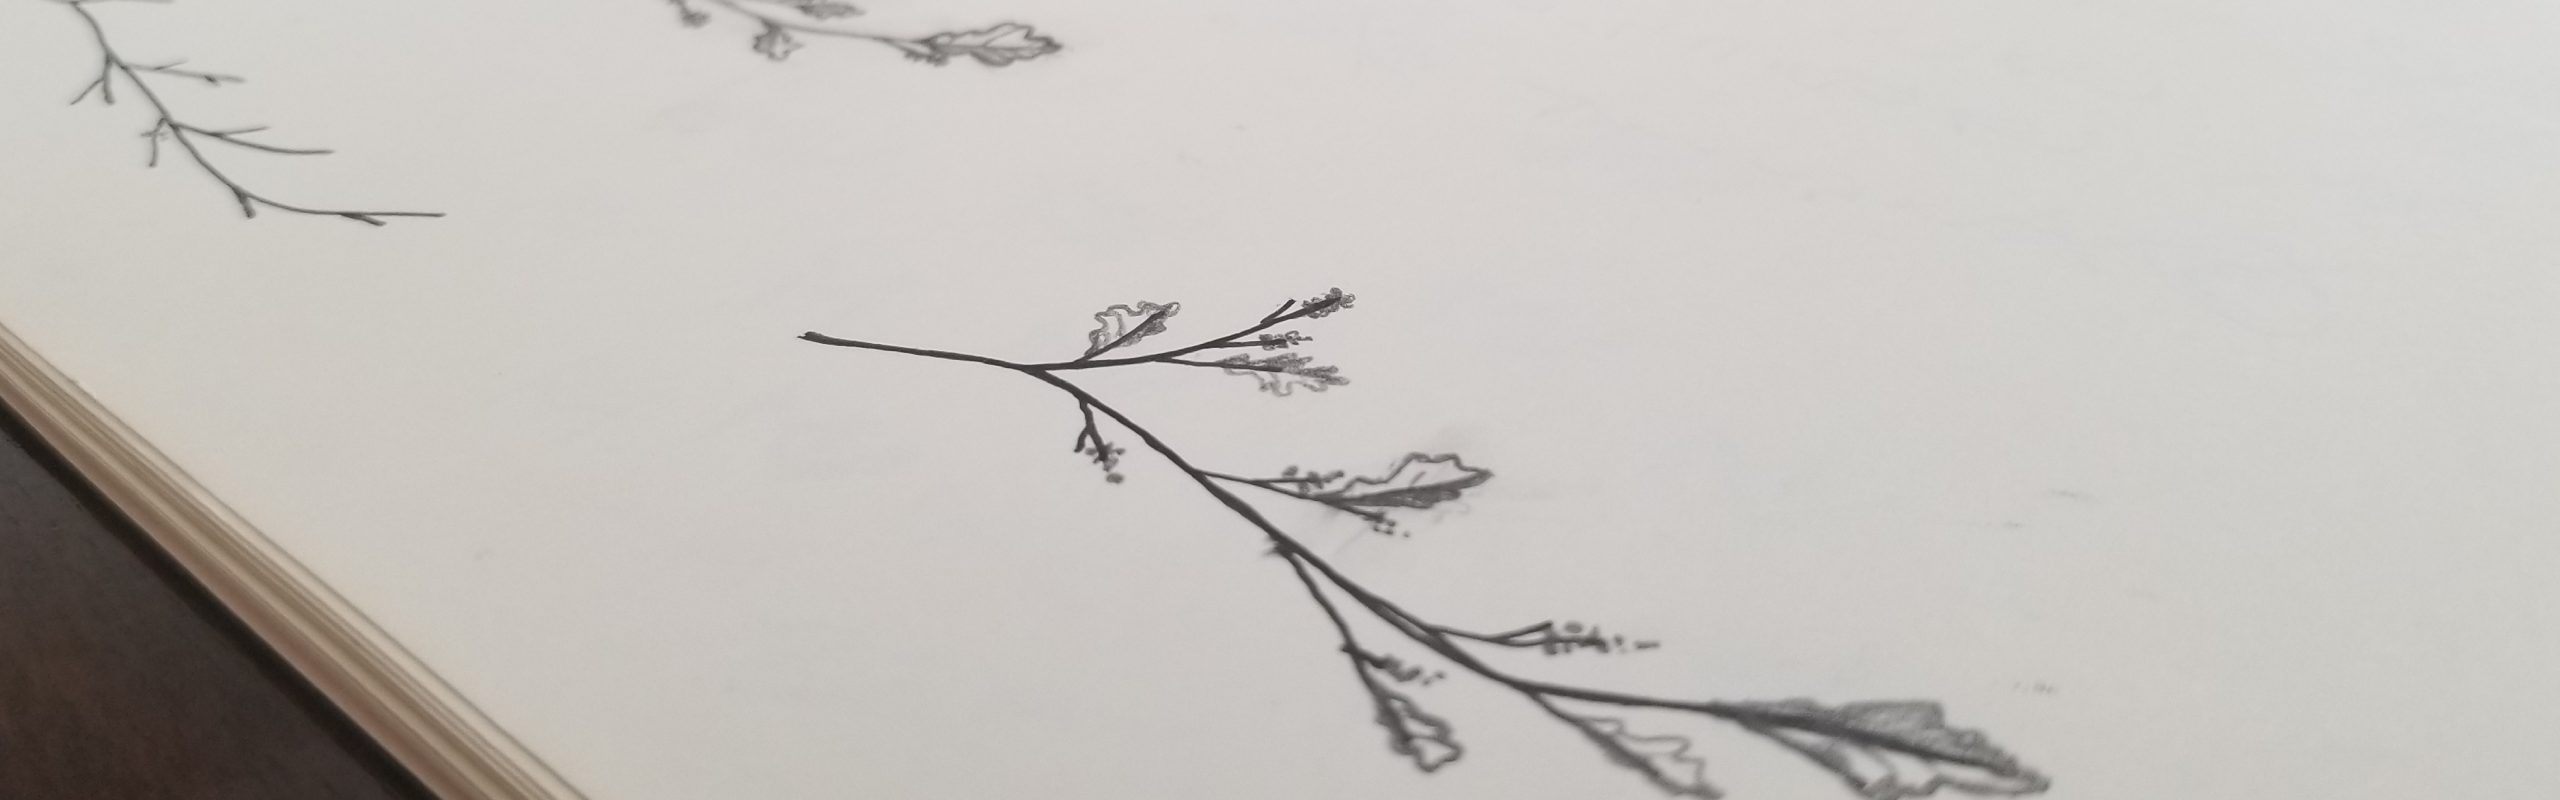 A black and white image of a hand-drawn sketch, depicting a single branch with delicate leaves, positioned diagonally across a white background, ideal for Kin & Comfort Interiors.